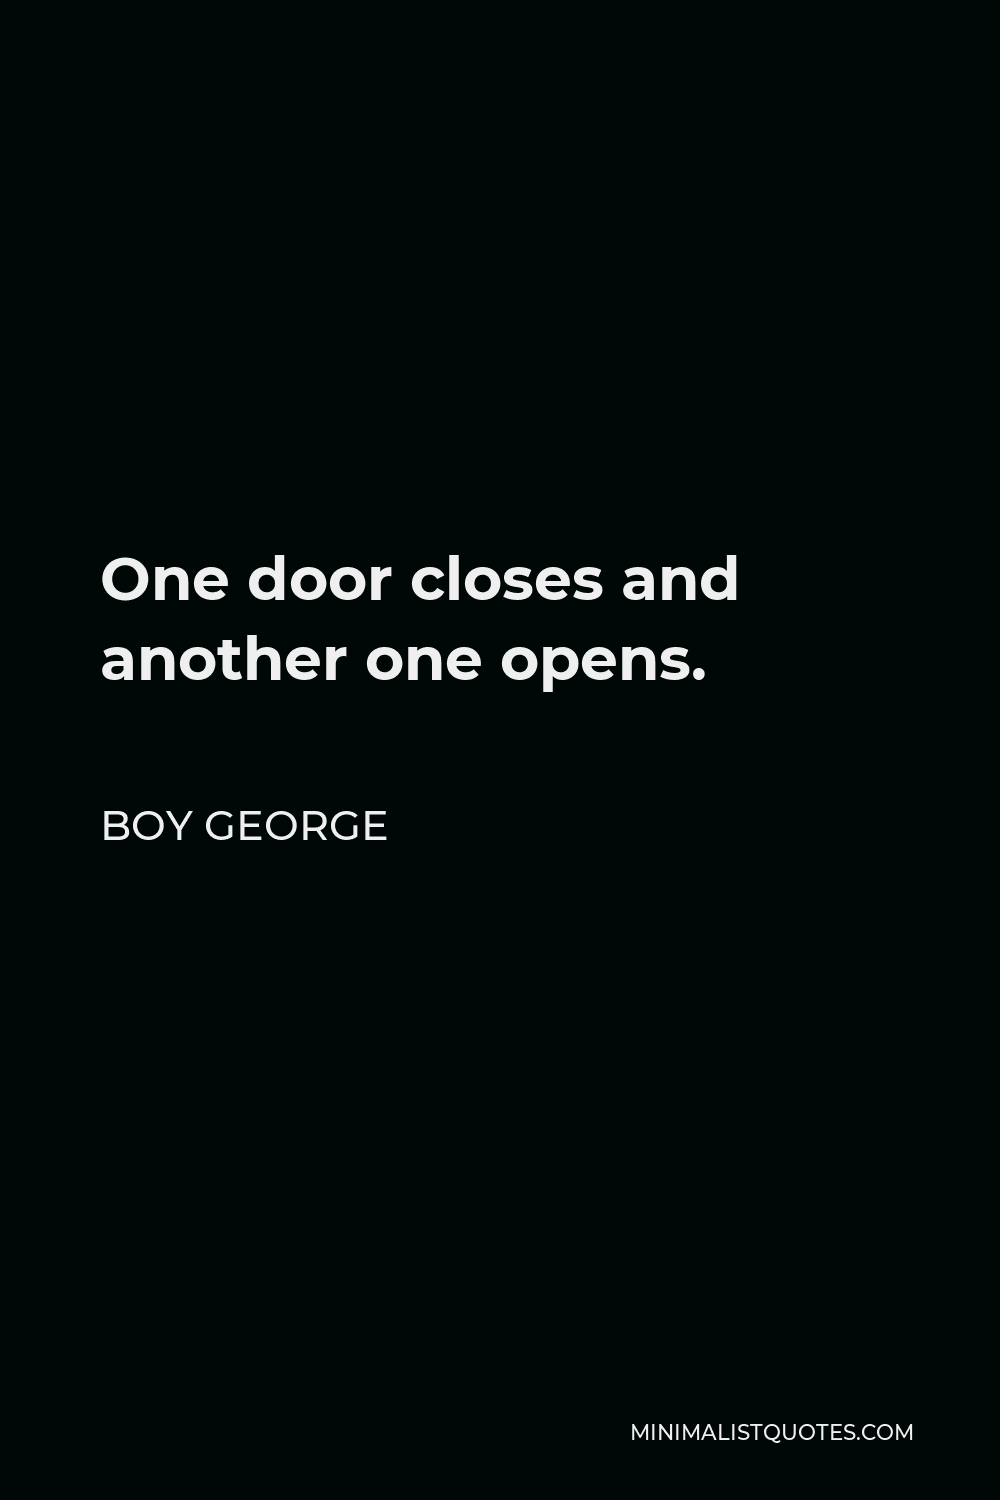 Boy George Quote - One door closes and another one opens.